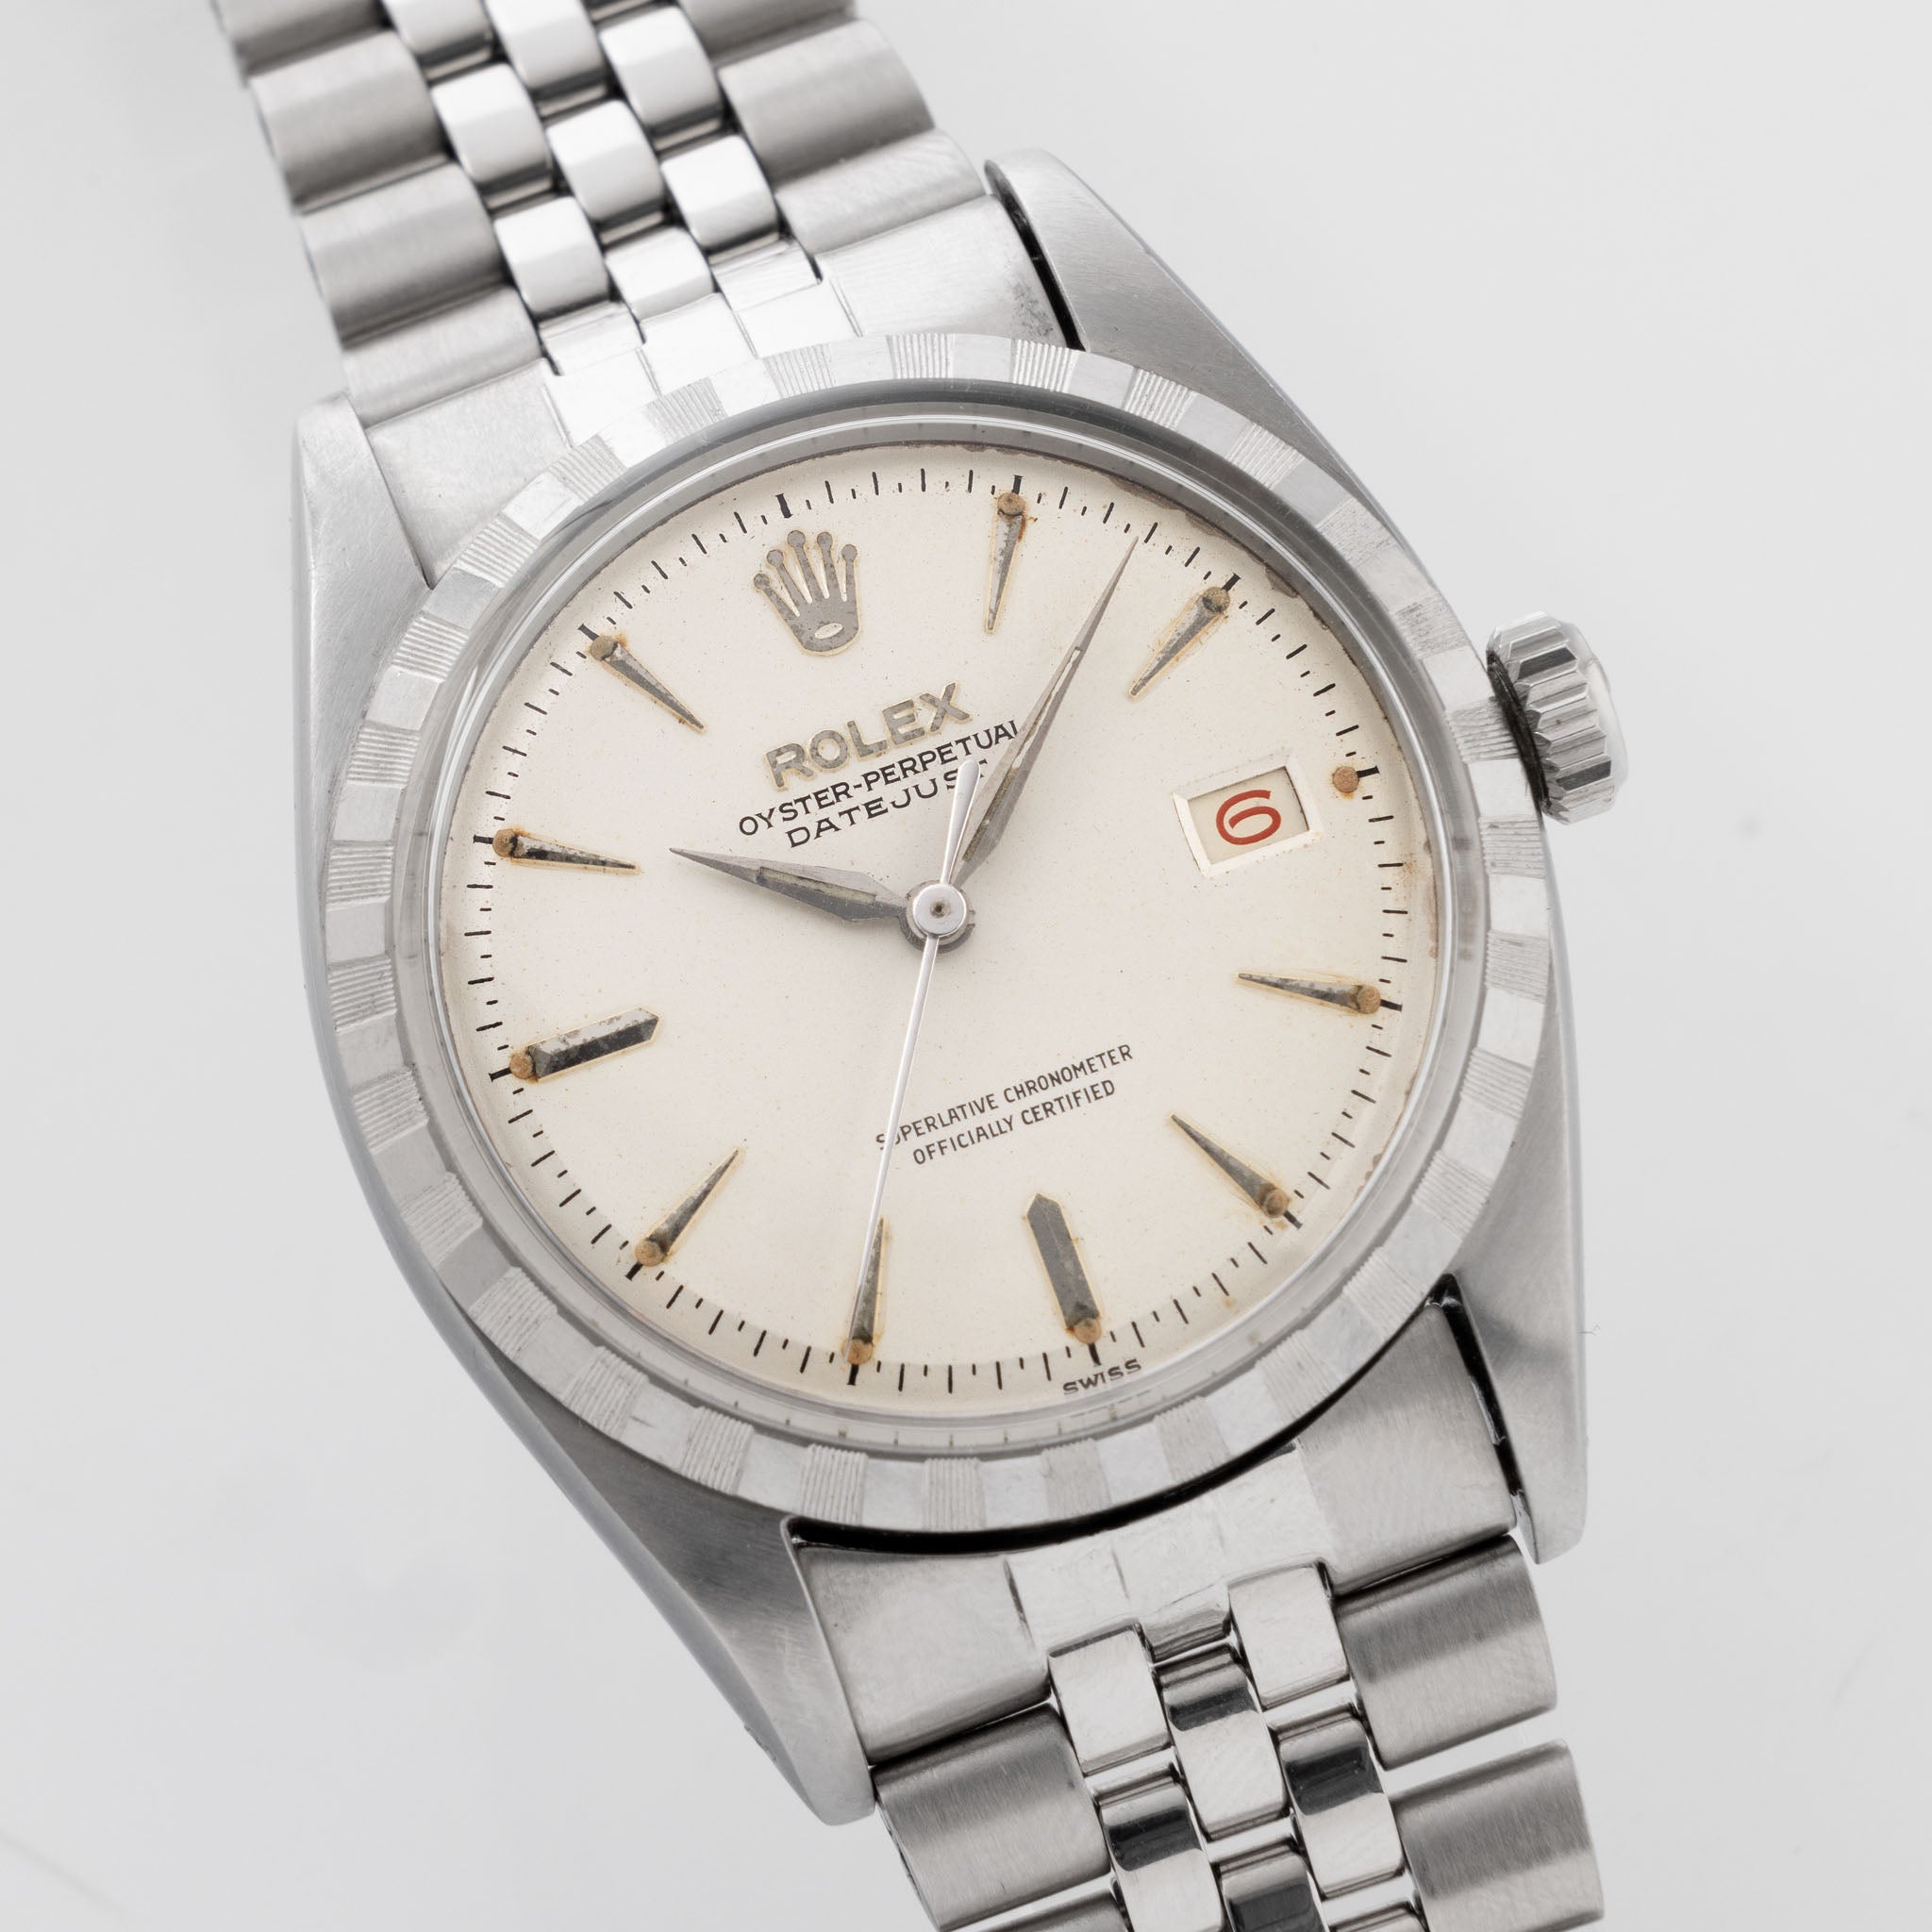 Rolex Datejust Radium Silver Dial Reference 6605